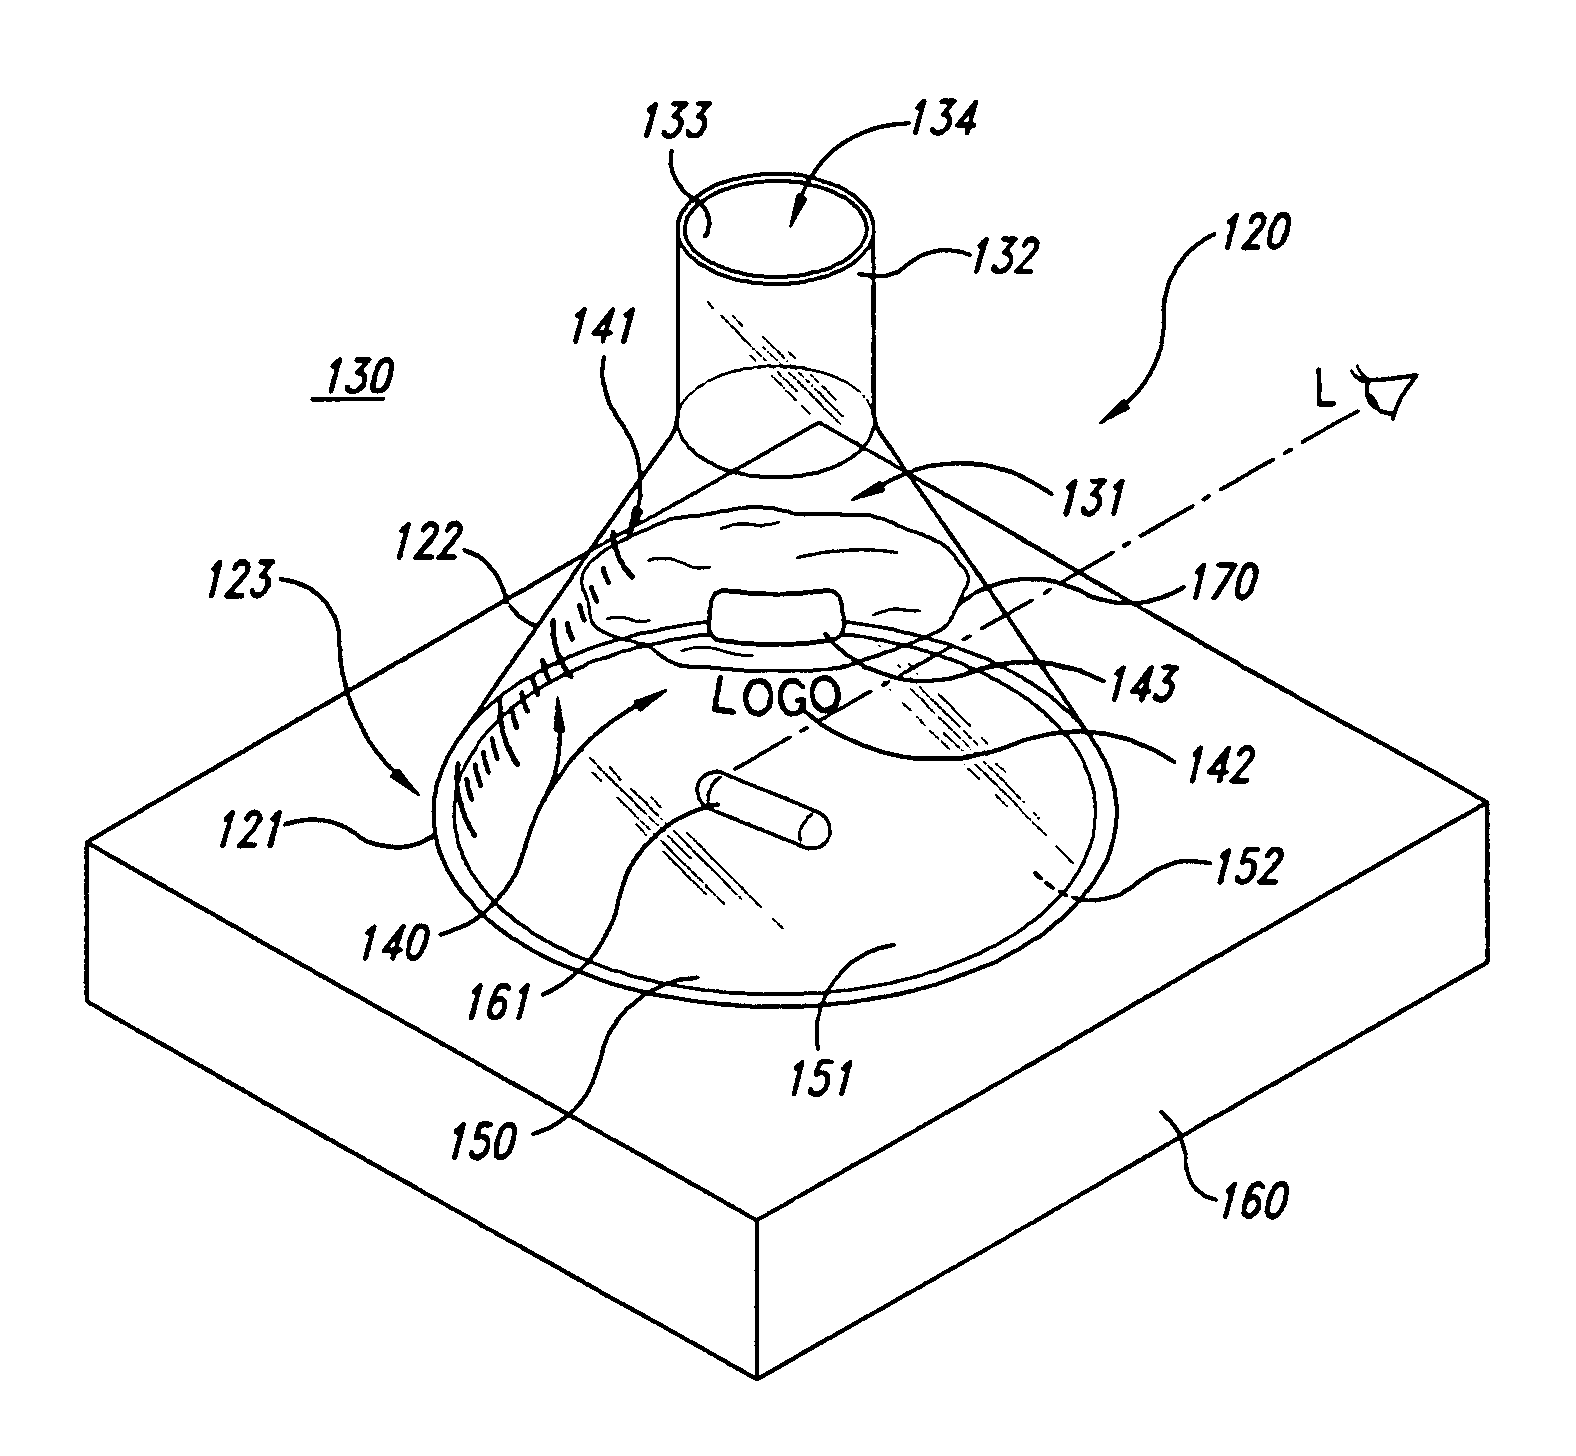 Apparatus and method for observing chemical substances